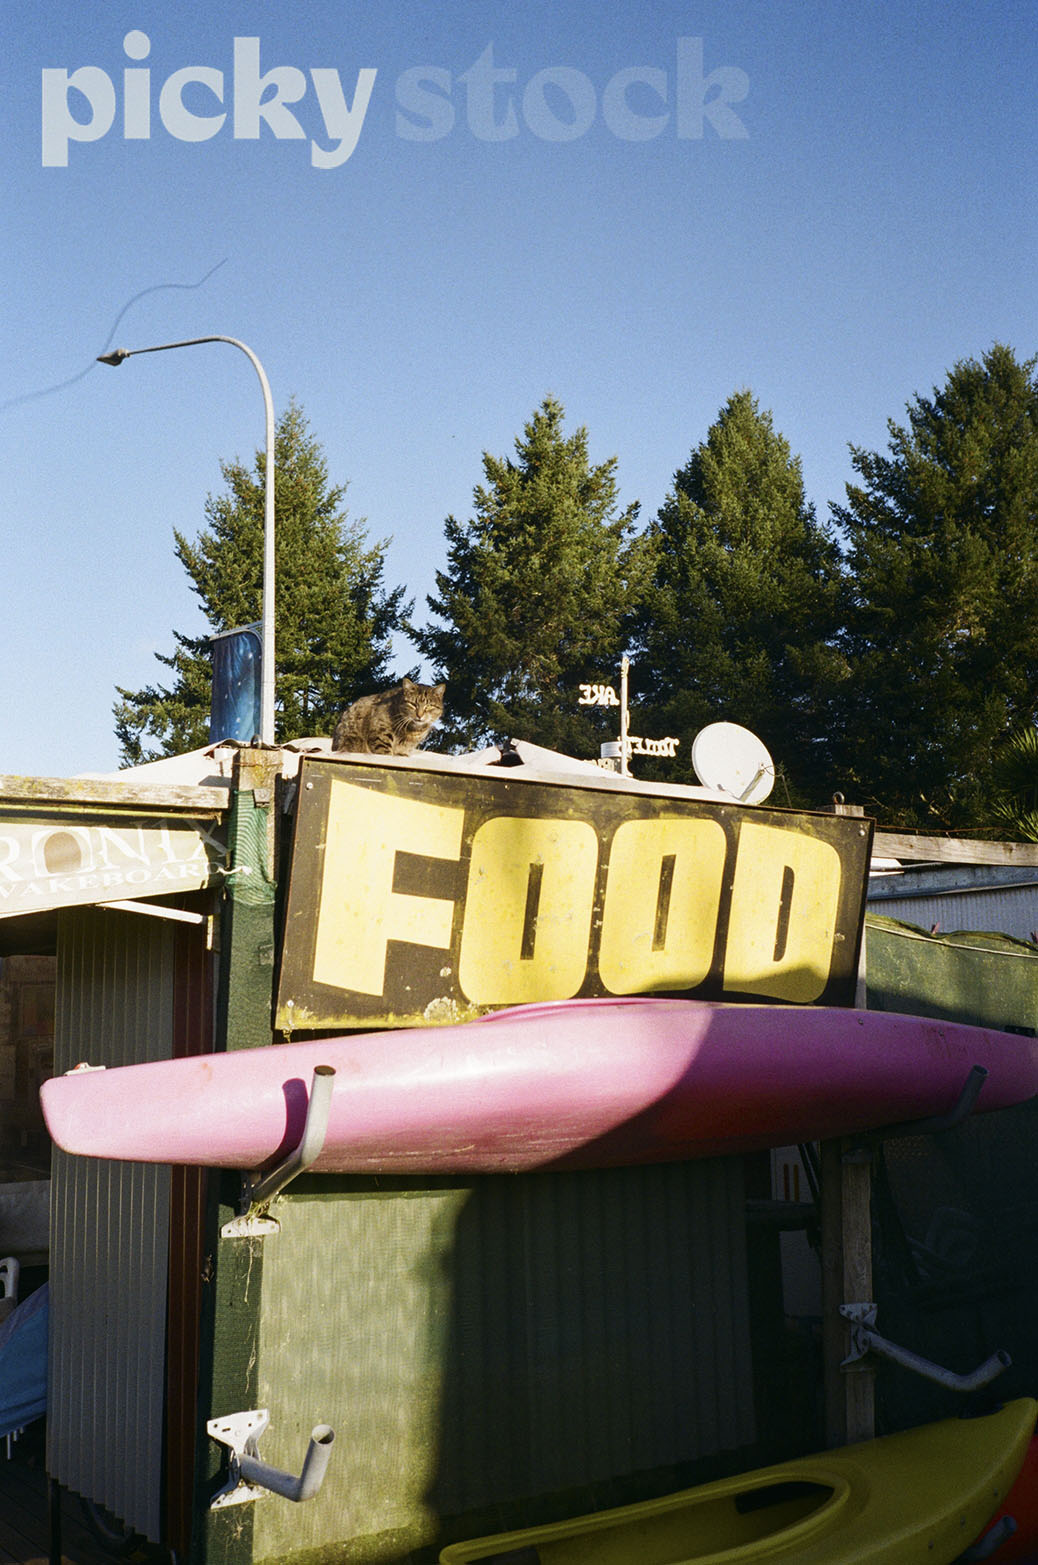 Portrait shot of a store, with a sign in yellow saying Food in caps lock. Kayak rack, with two kayaks stacked, pink and yellow. Blue sky. Cat sitting on the roof of the shop looking at camera